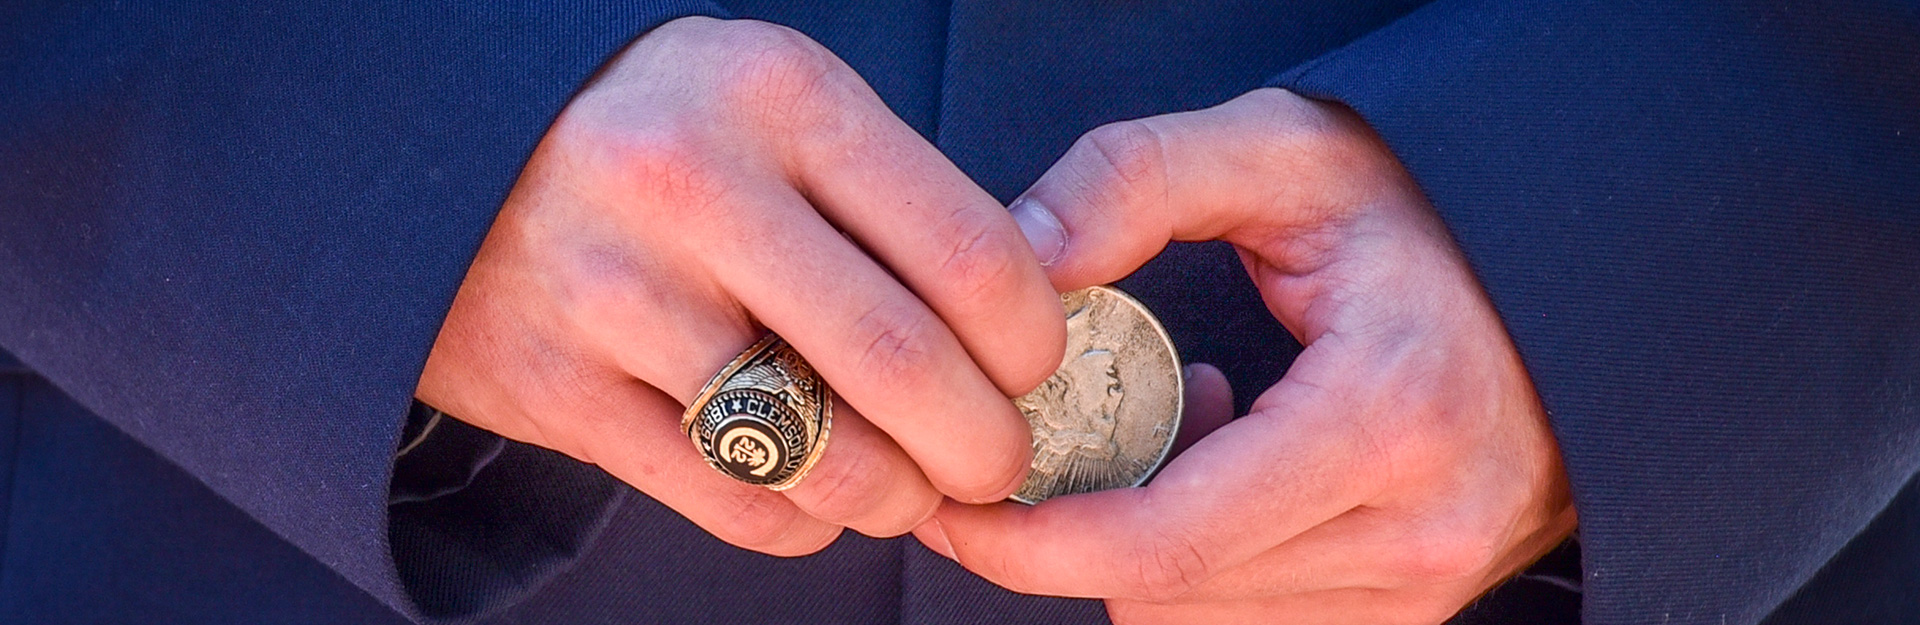 Uniformed person hands holding coin.